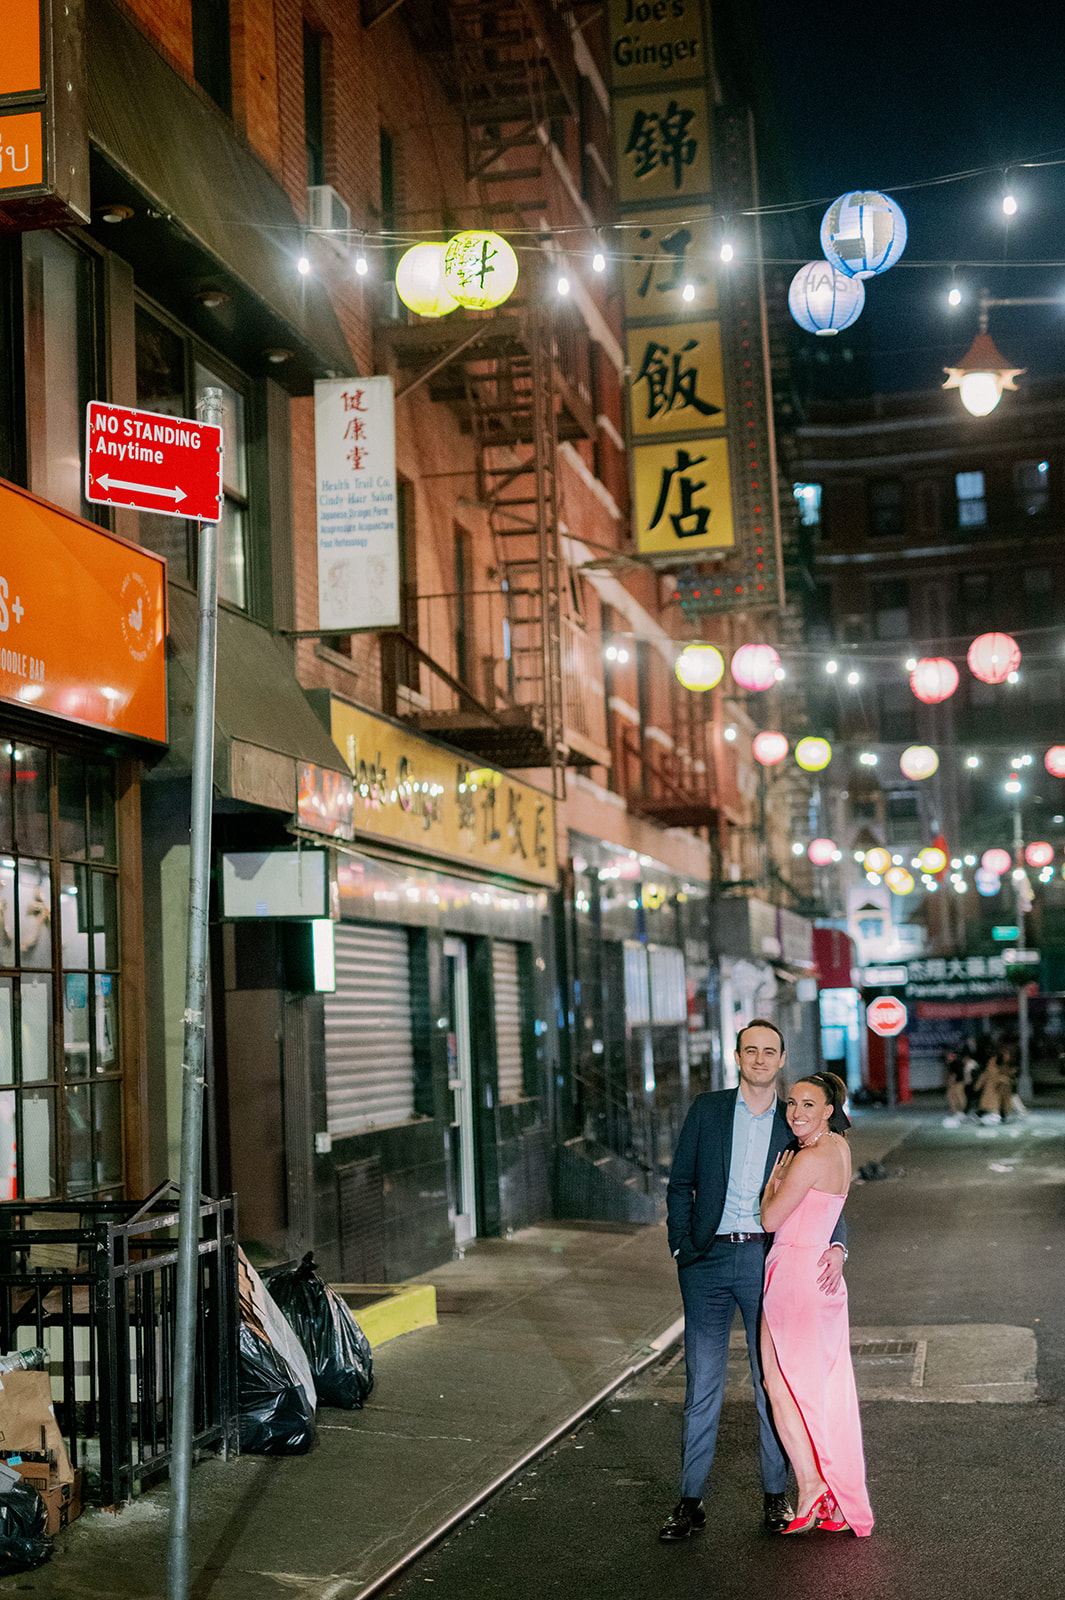 Couple wearing formal attire posing on a street in Chinatown, NYC.